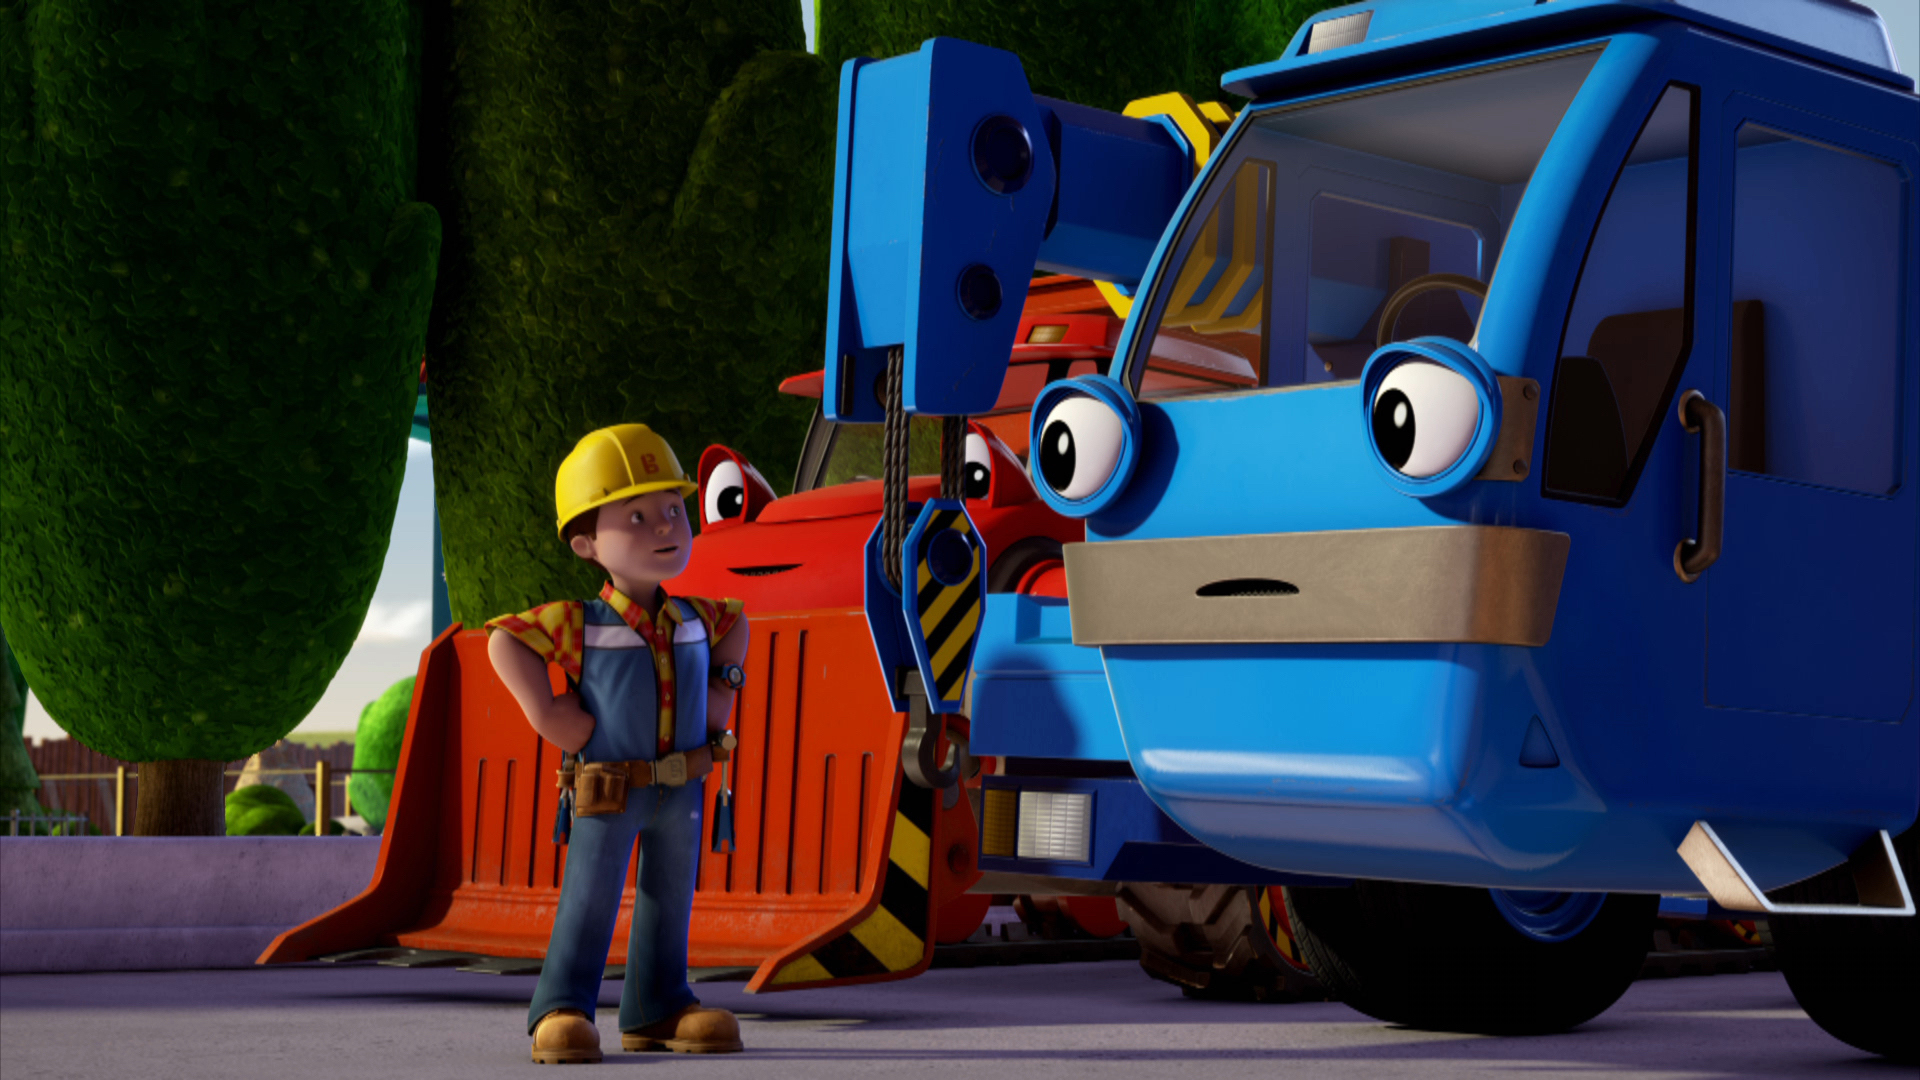 Watch Bob The Builder Season 1 Episode 41 Wind And Shine Full Show